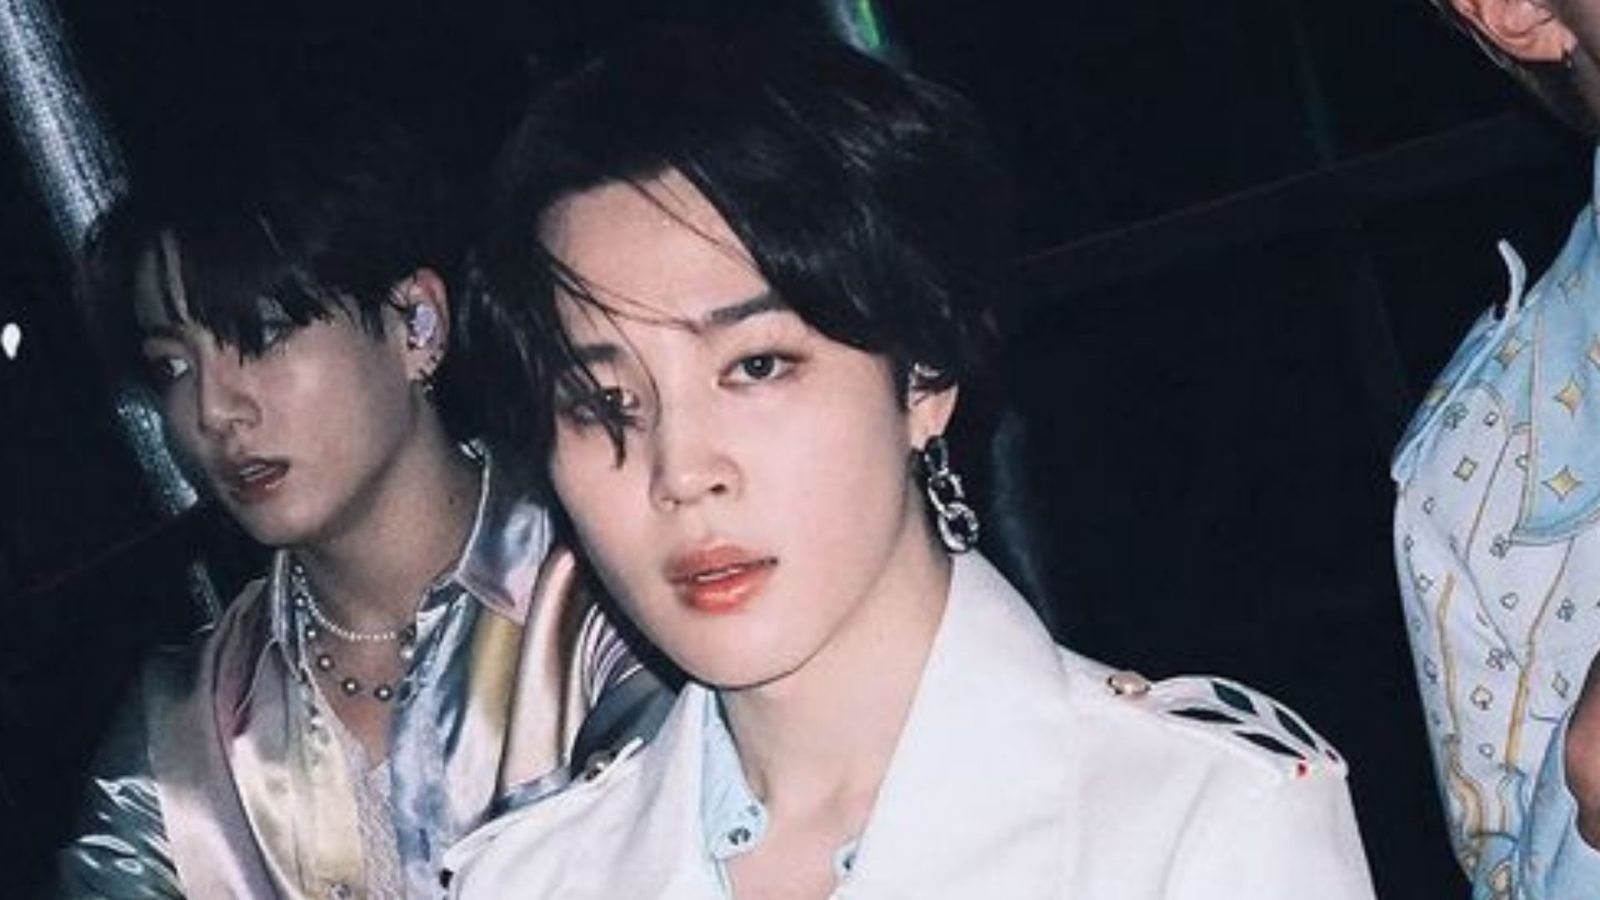 BTS member Jimin to make OST debut with Korean drama 'Our Blues'